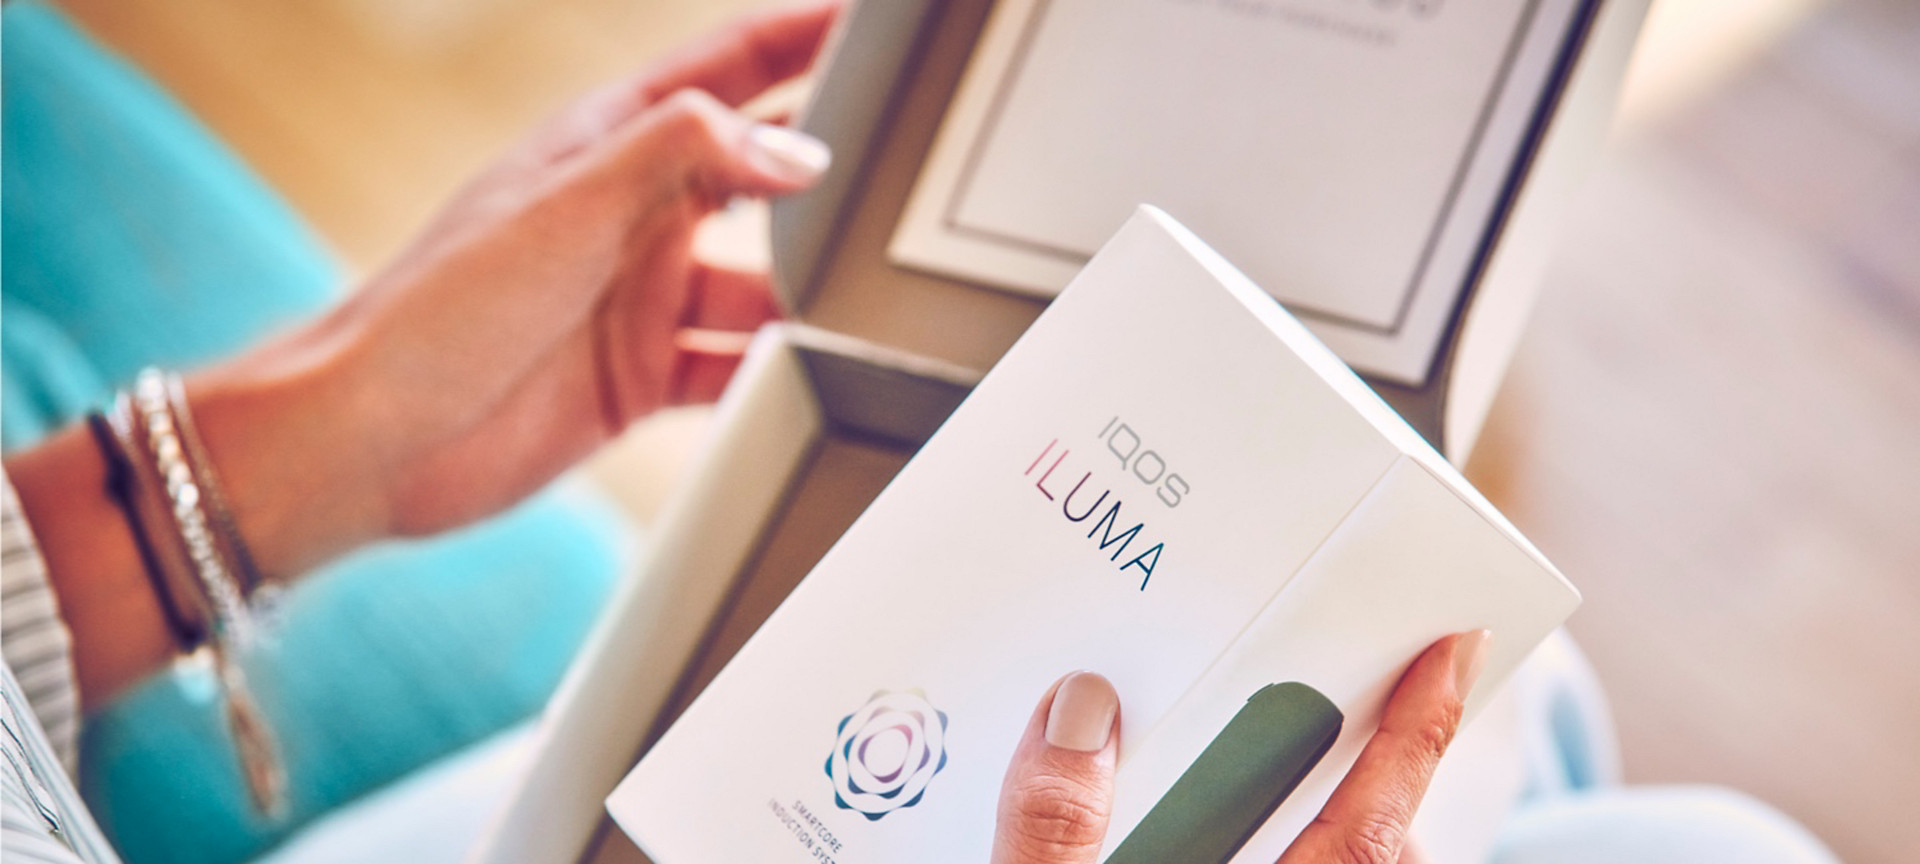 A person holding a box that contains a booklet on IQOS ILUMA.